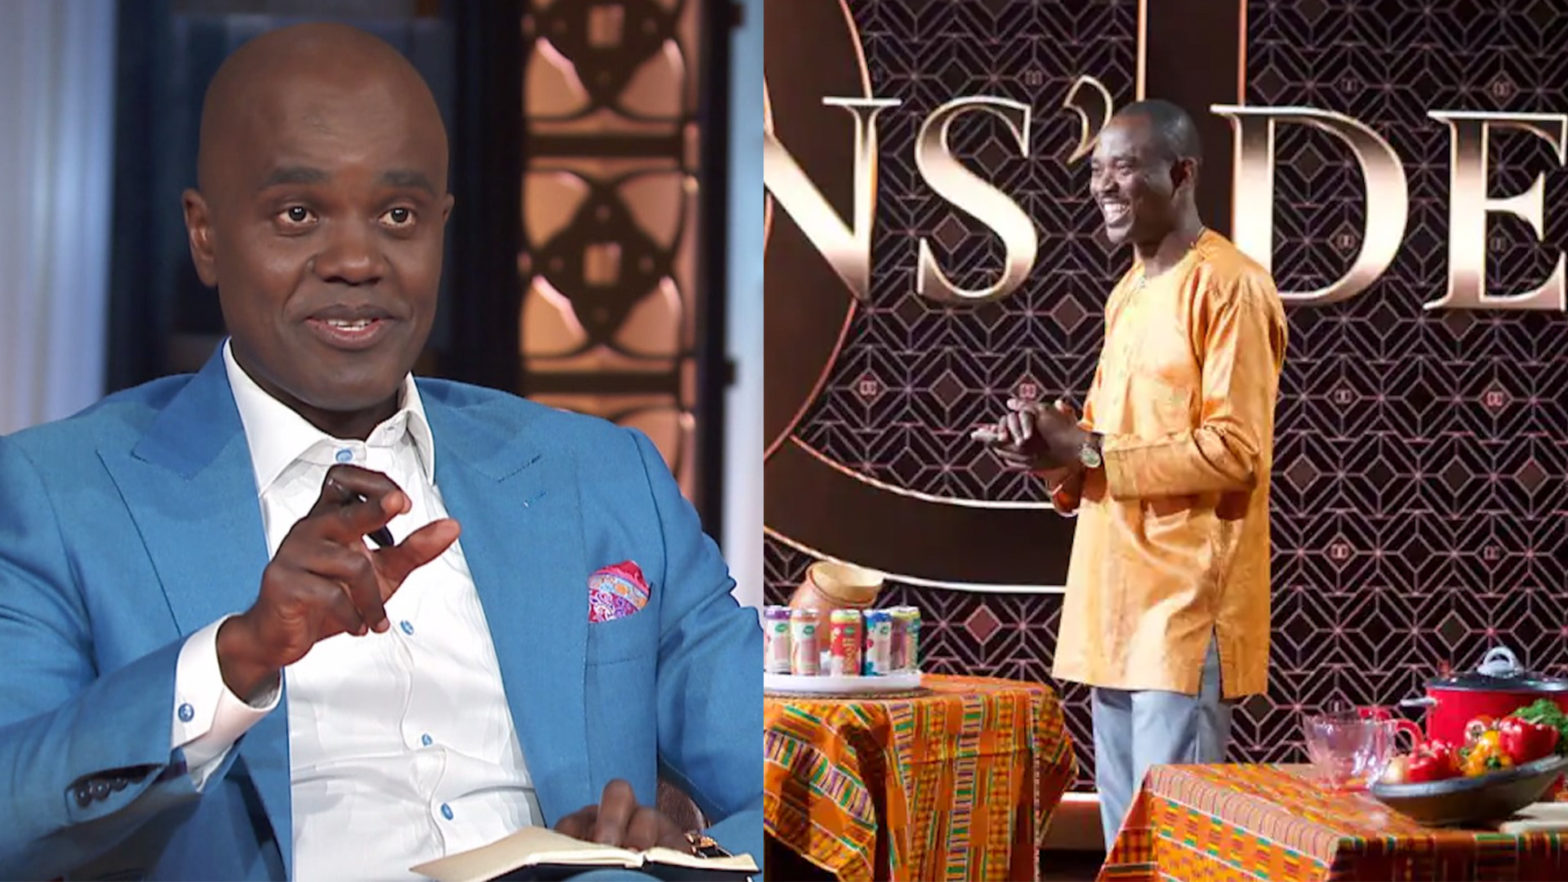 Cameroonian Man Asks For $60K For His Jollof Rice Business And Wes Hall Offers Him $600K Instead